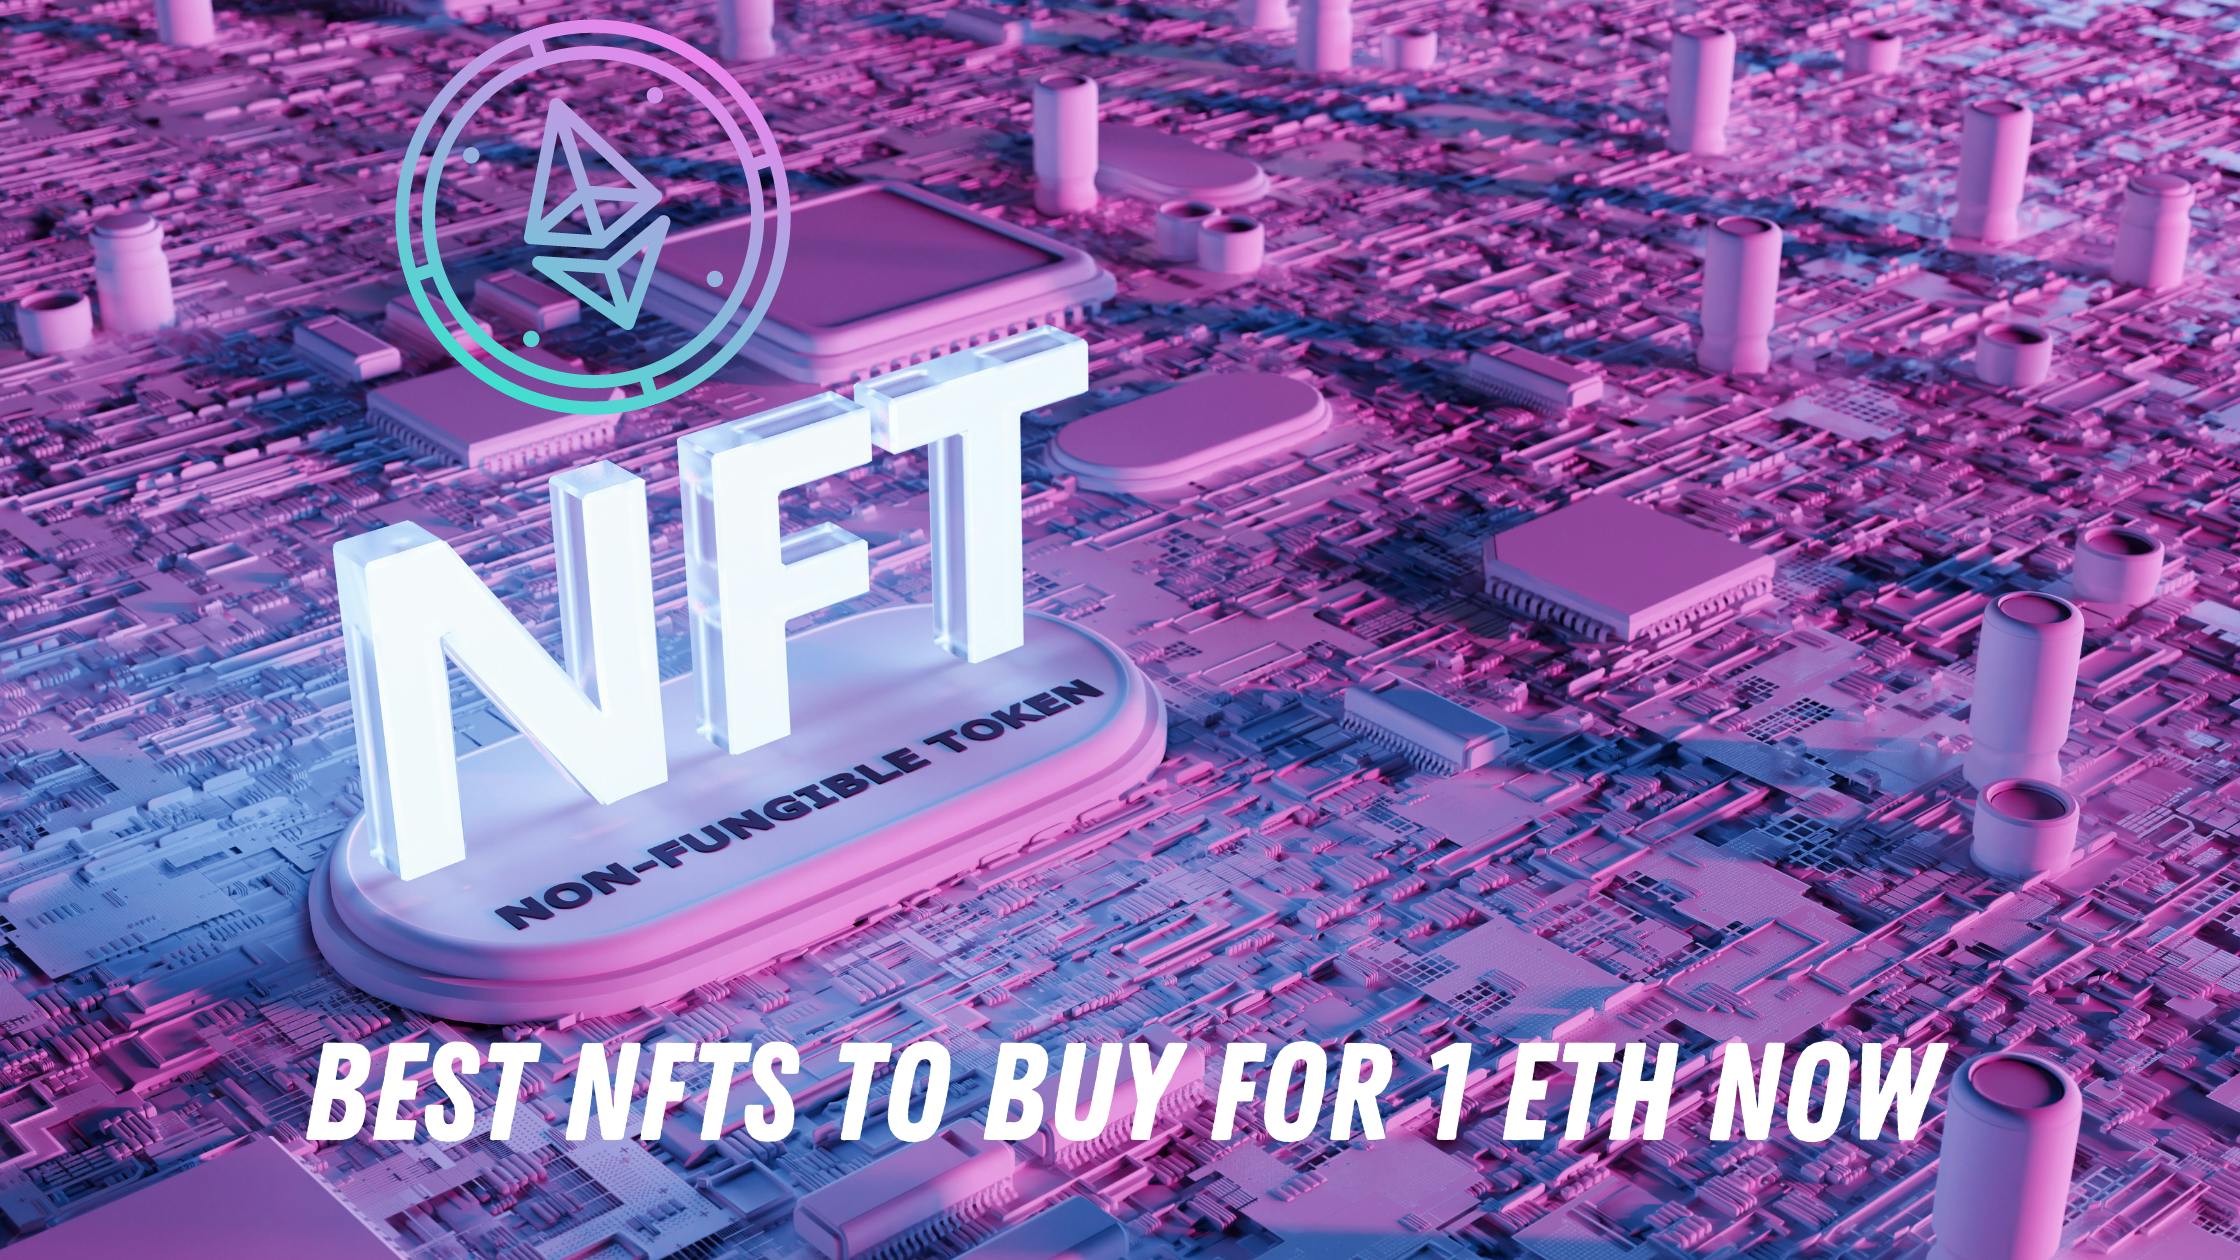 Best NFTs to Buy for 1 ETH Now: A detailed guide